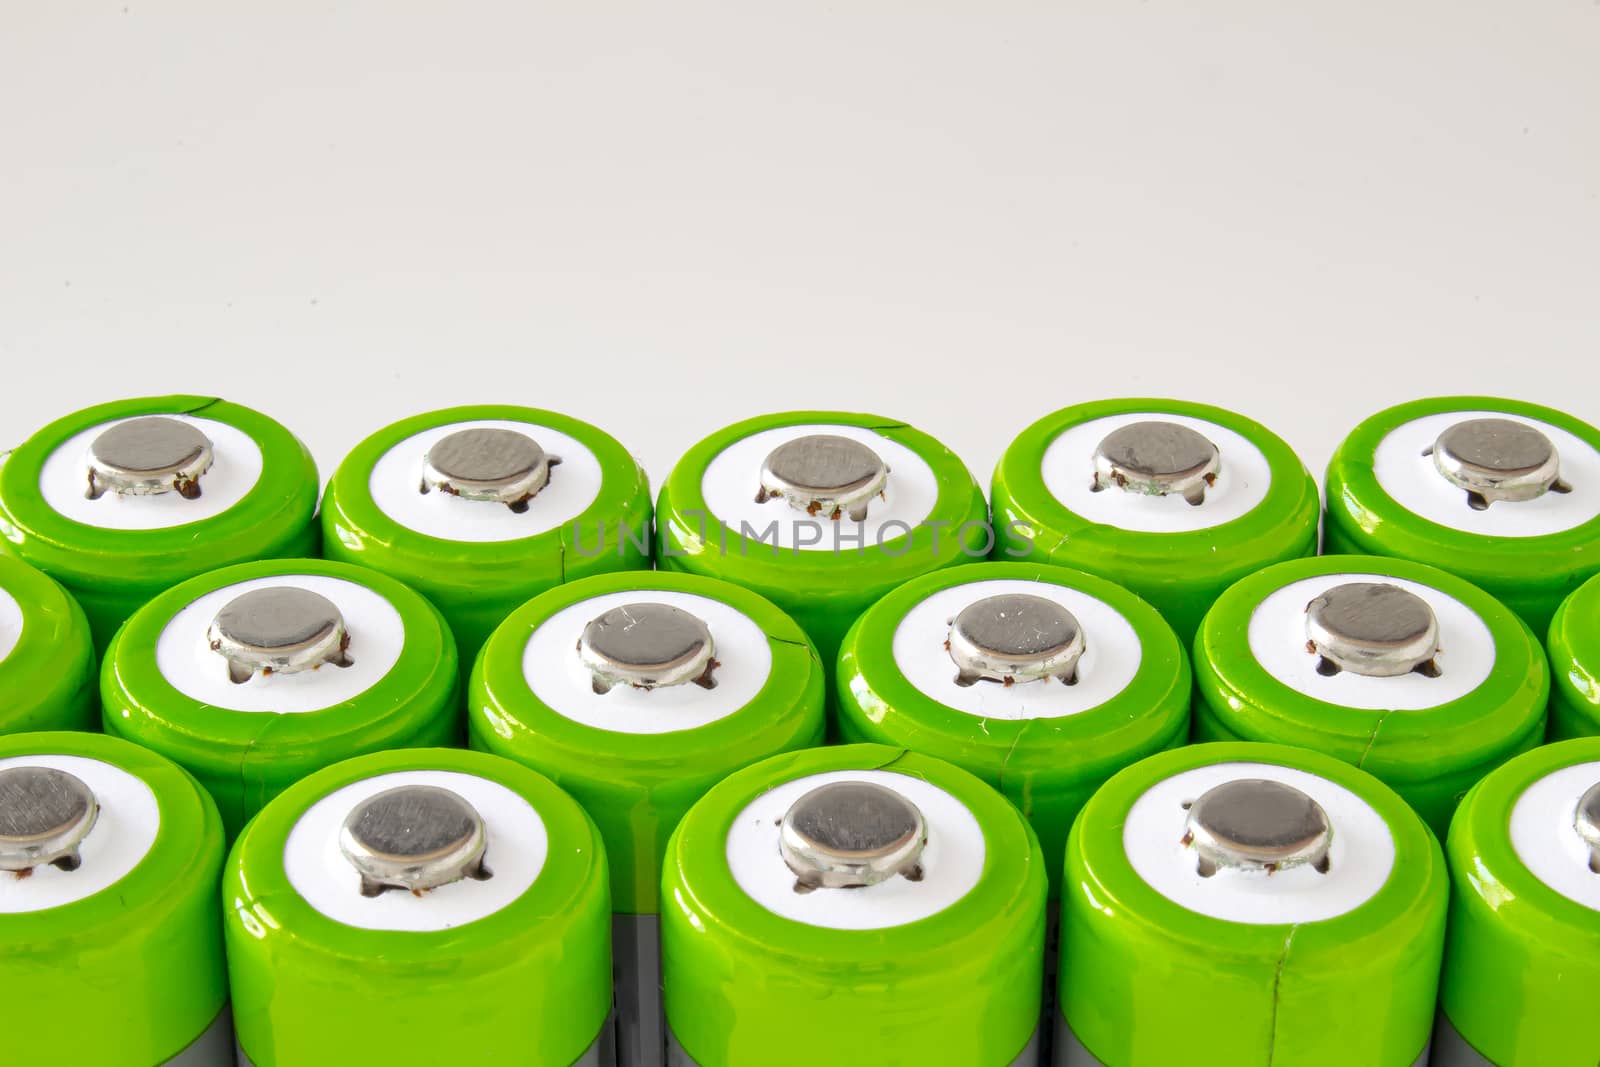 A group of High-Capacity Rechargeable Batteries on a white background by oasisamuel